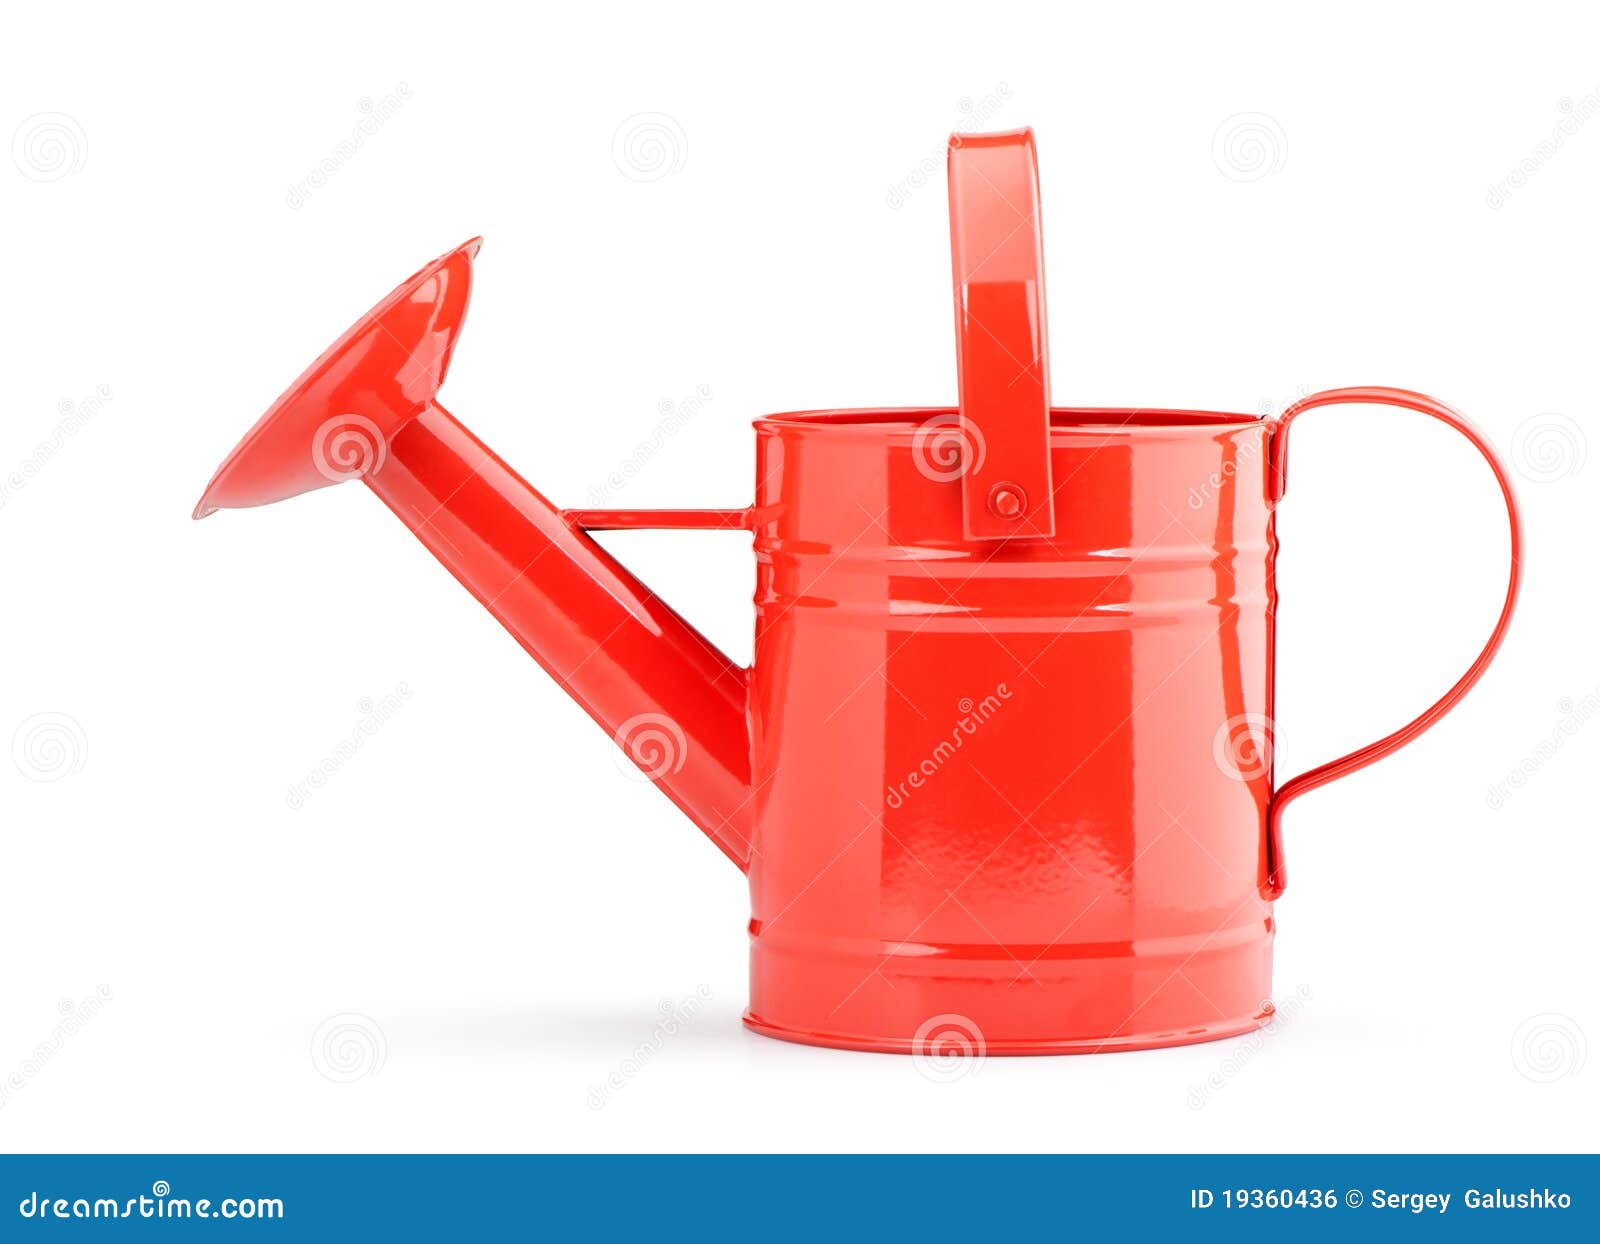 Red watering can stock photo. Image of shiny, watering - 19360436